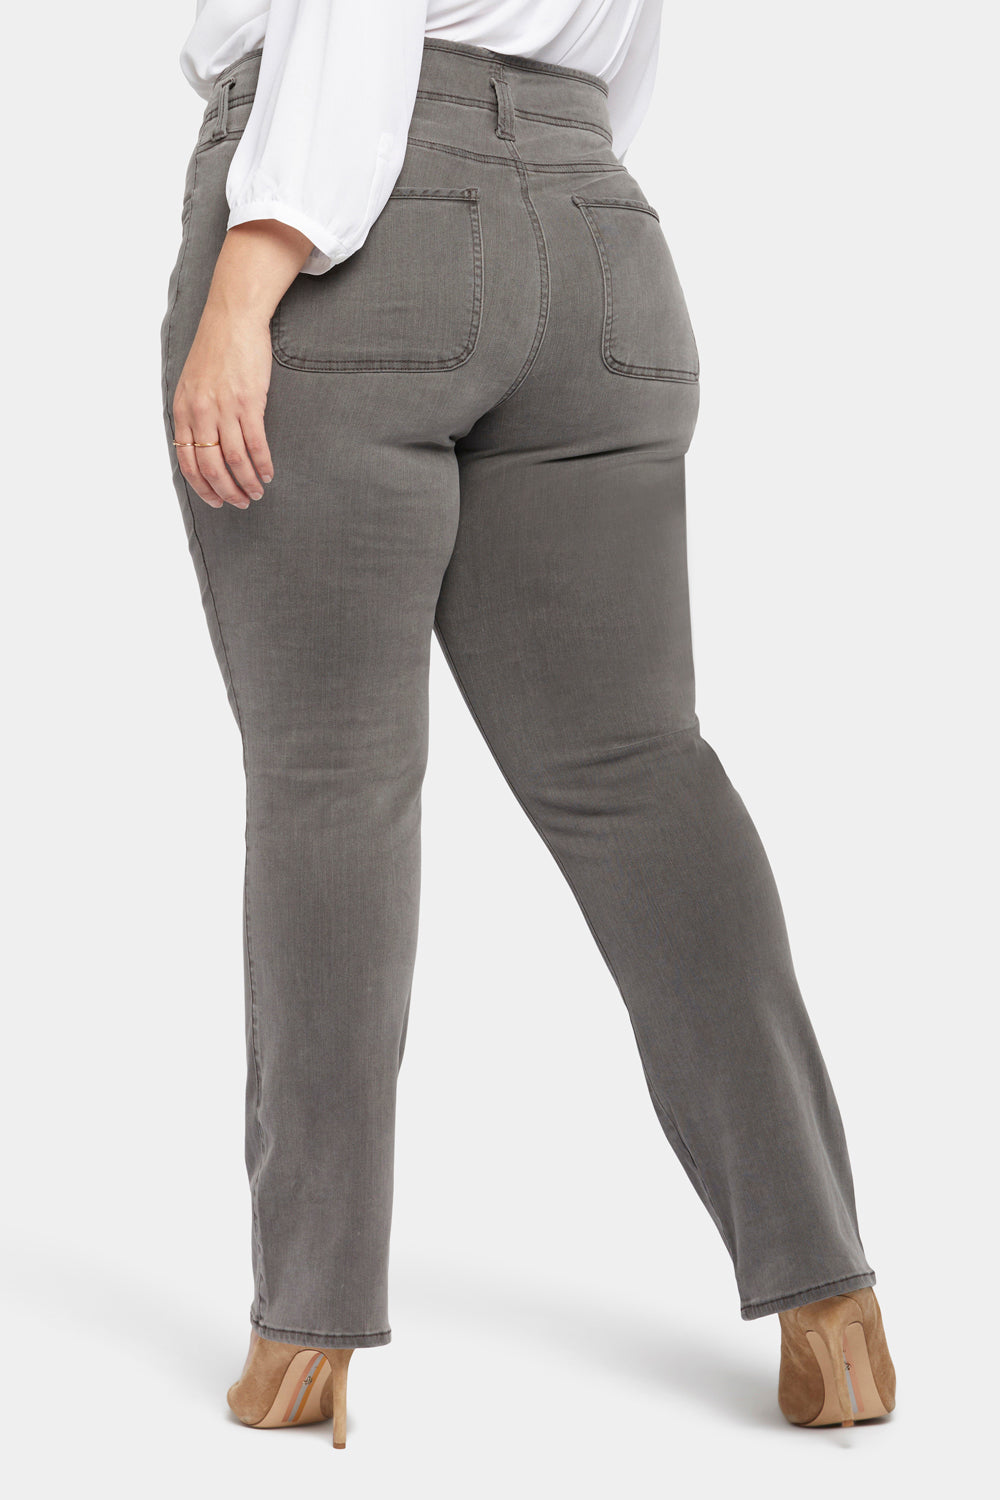 Marilyn Straight Jeans In Plus Size - Smokey Mountain